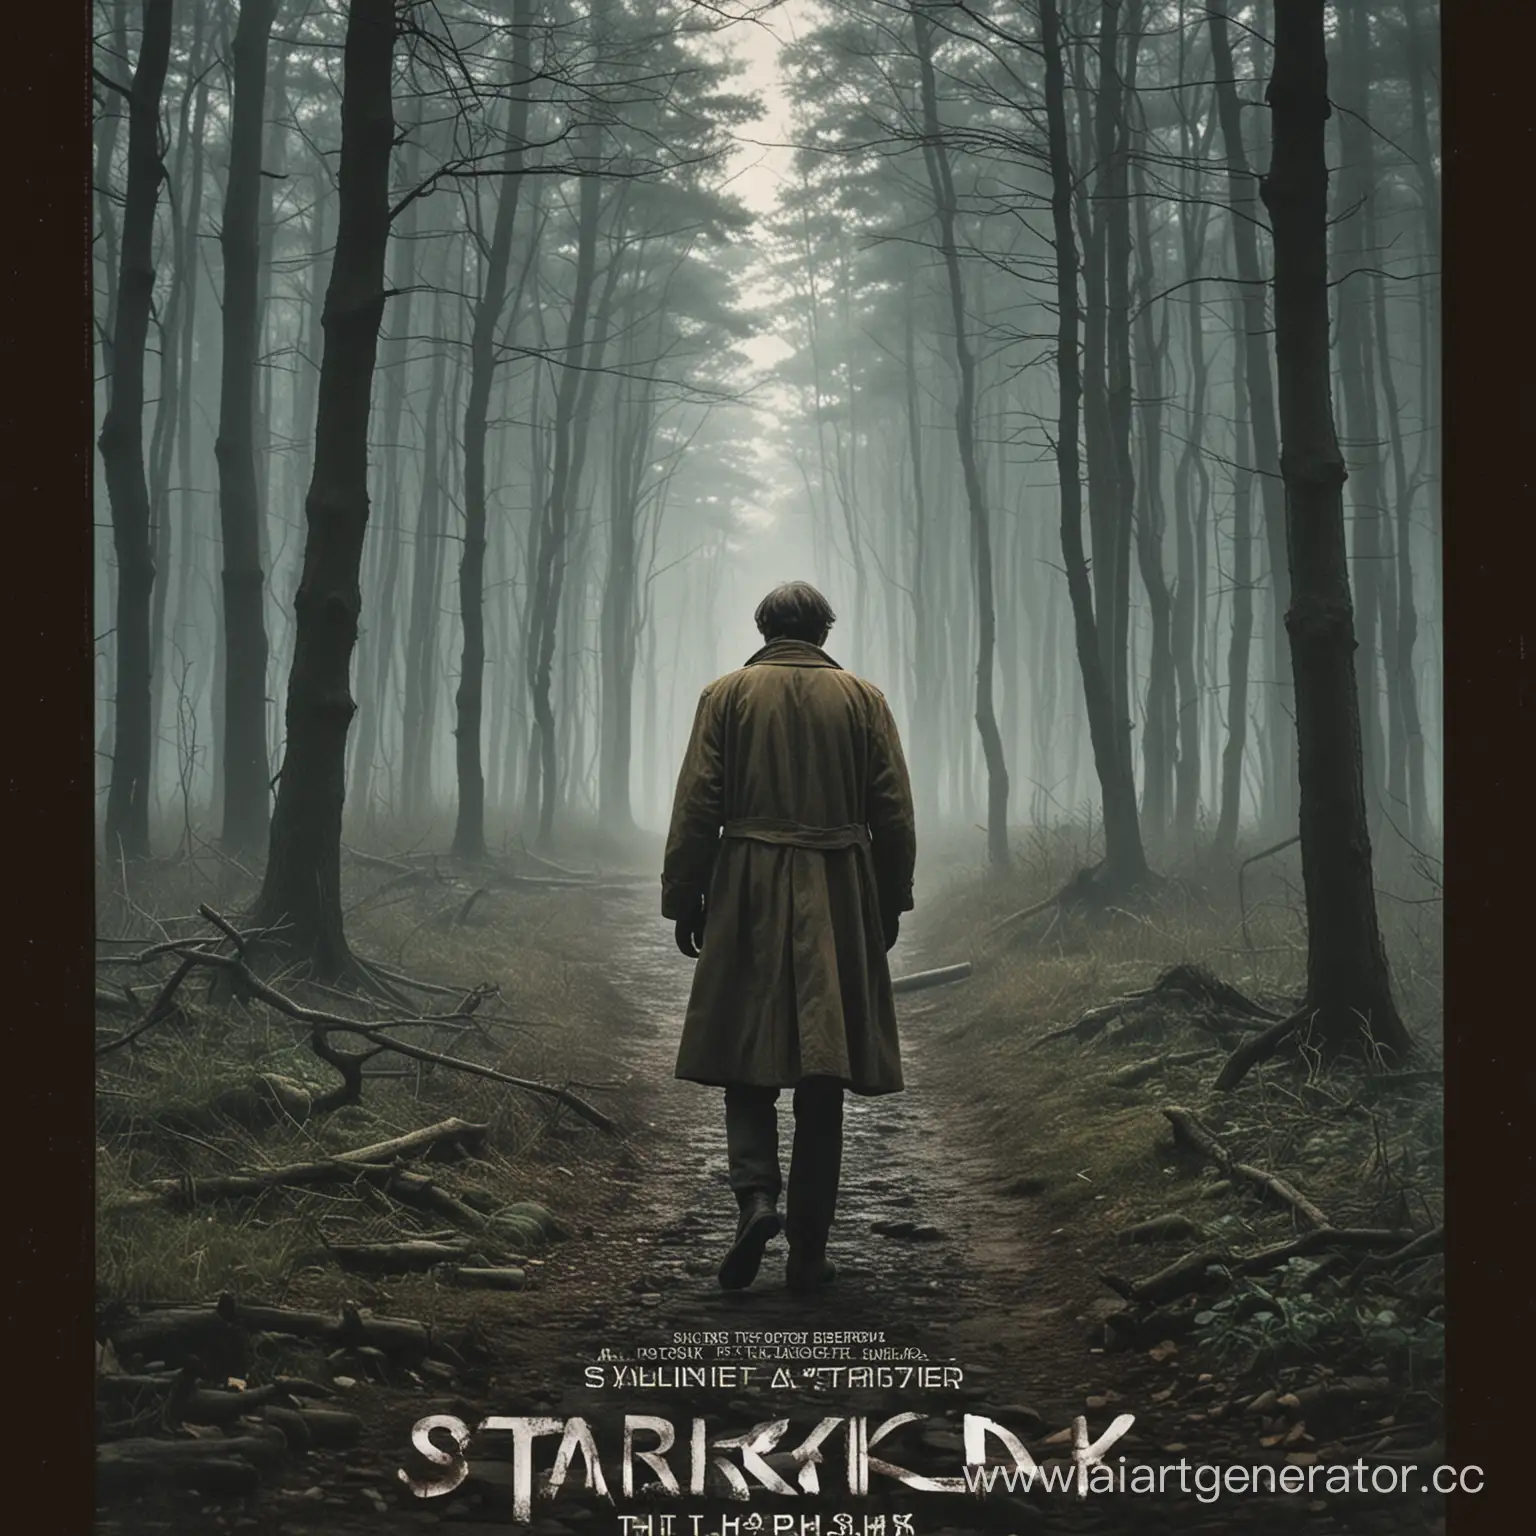 Poster for Tarkovsky movie Stalker with main character figure on it